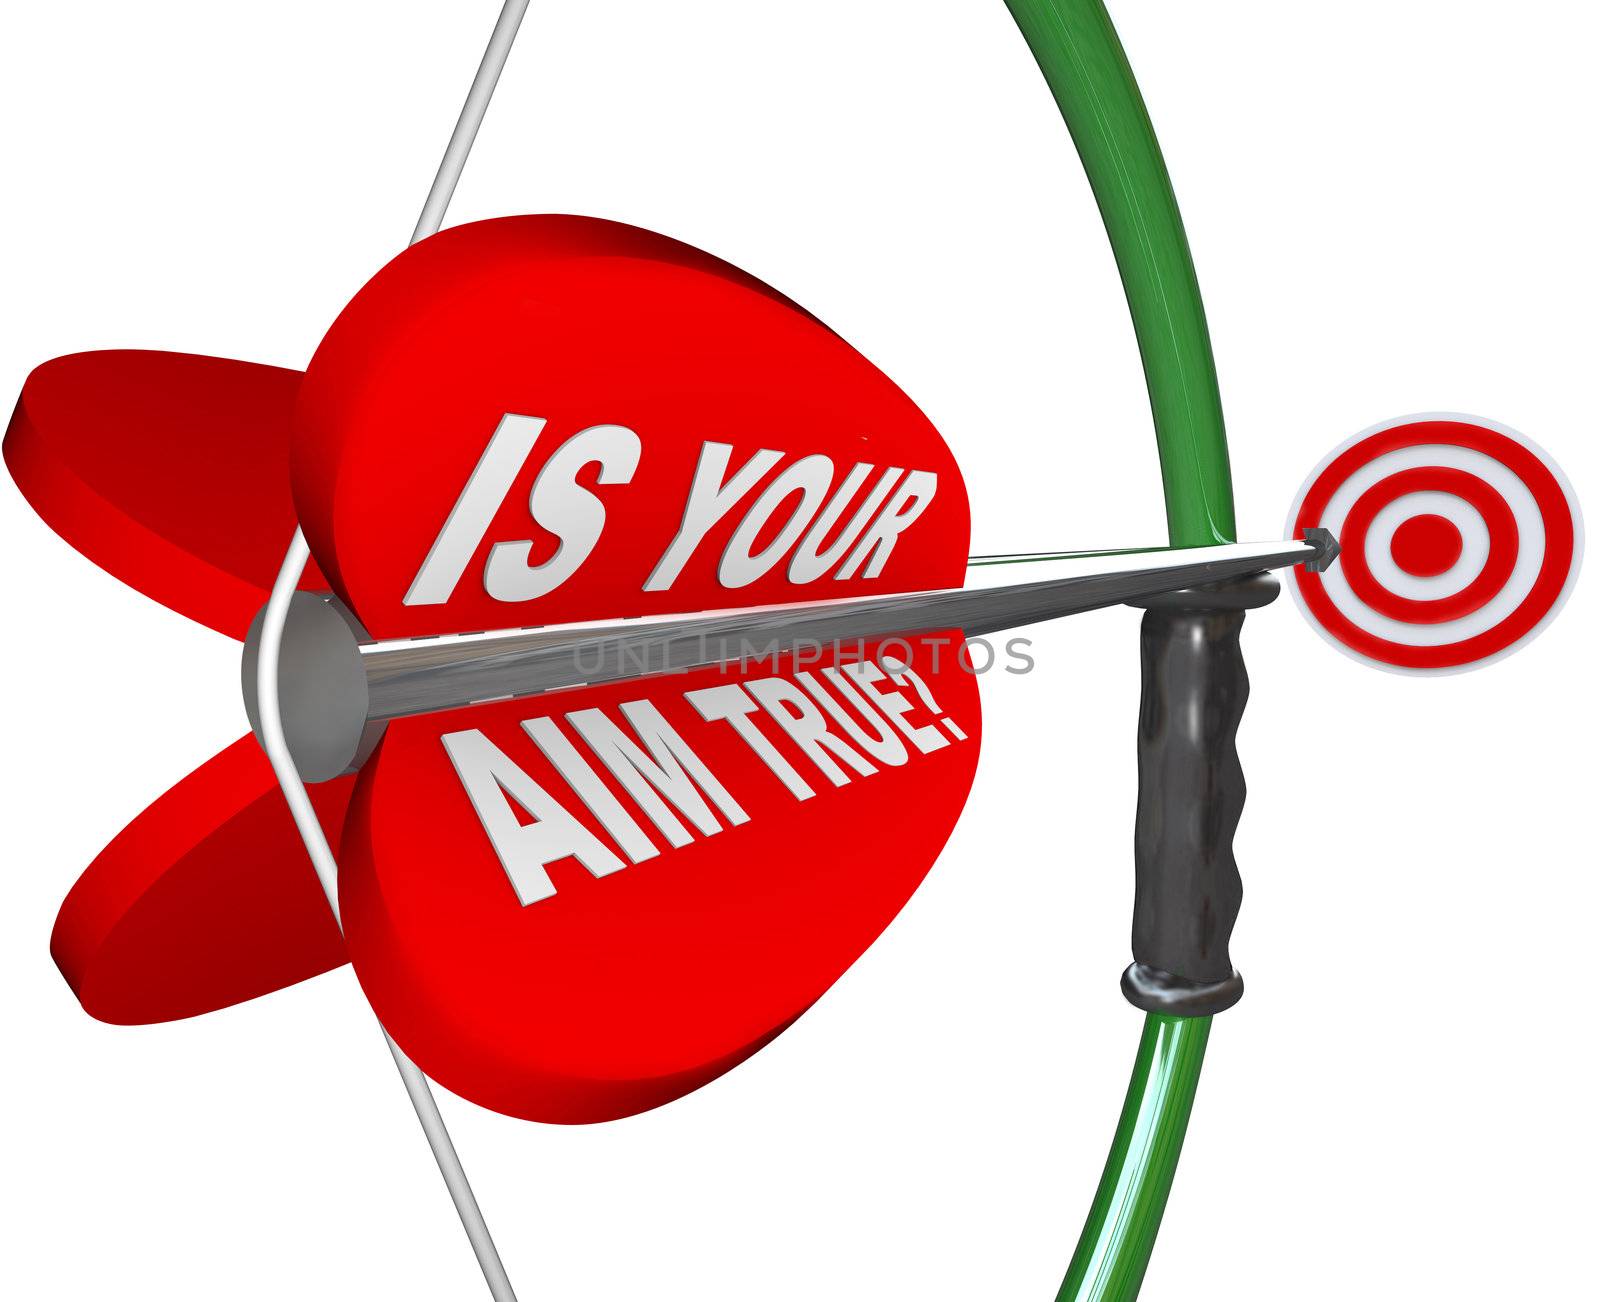 Is Your Aim True? Question on Bow and Arrow Target by iQoncept